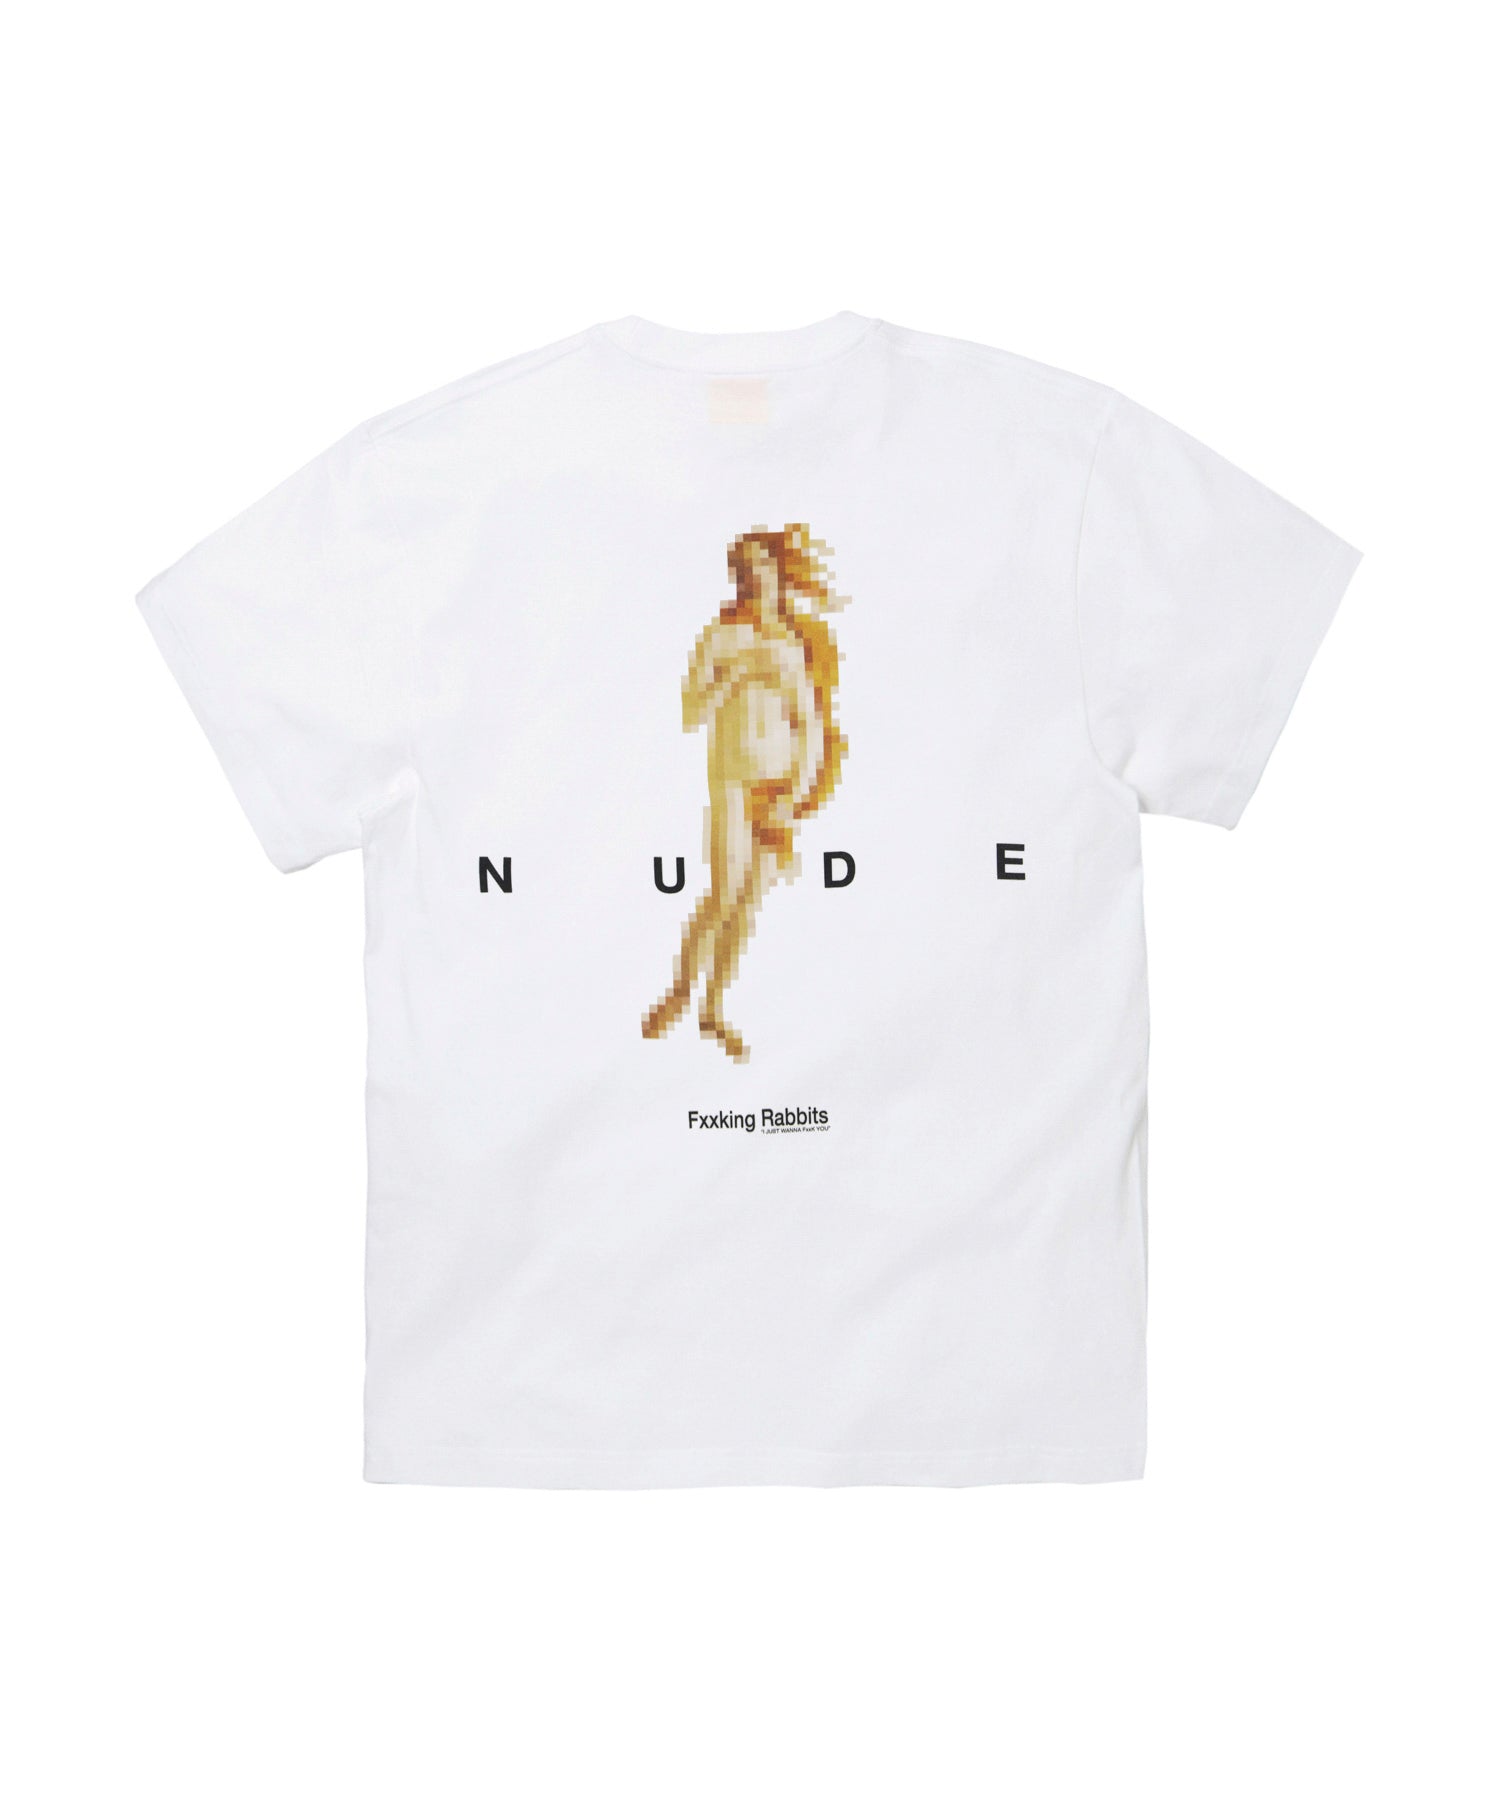 Pixelated Nude T-shirt – #FR2